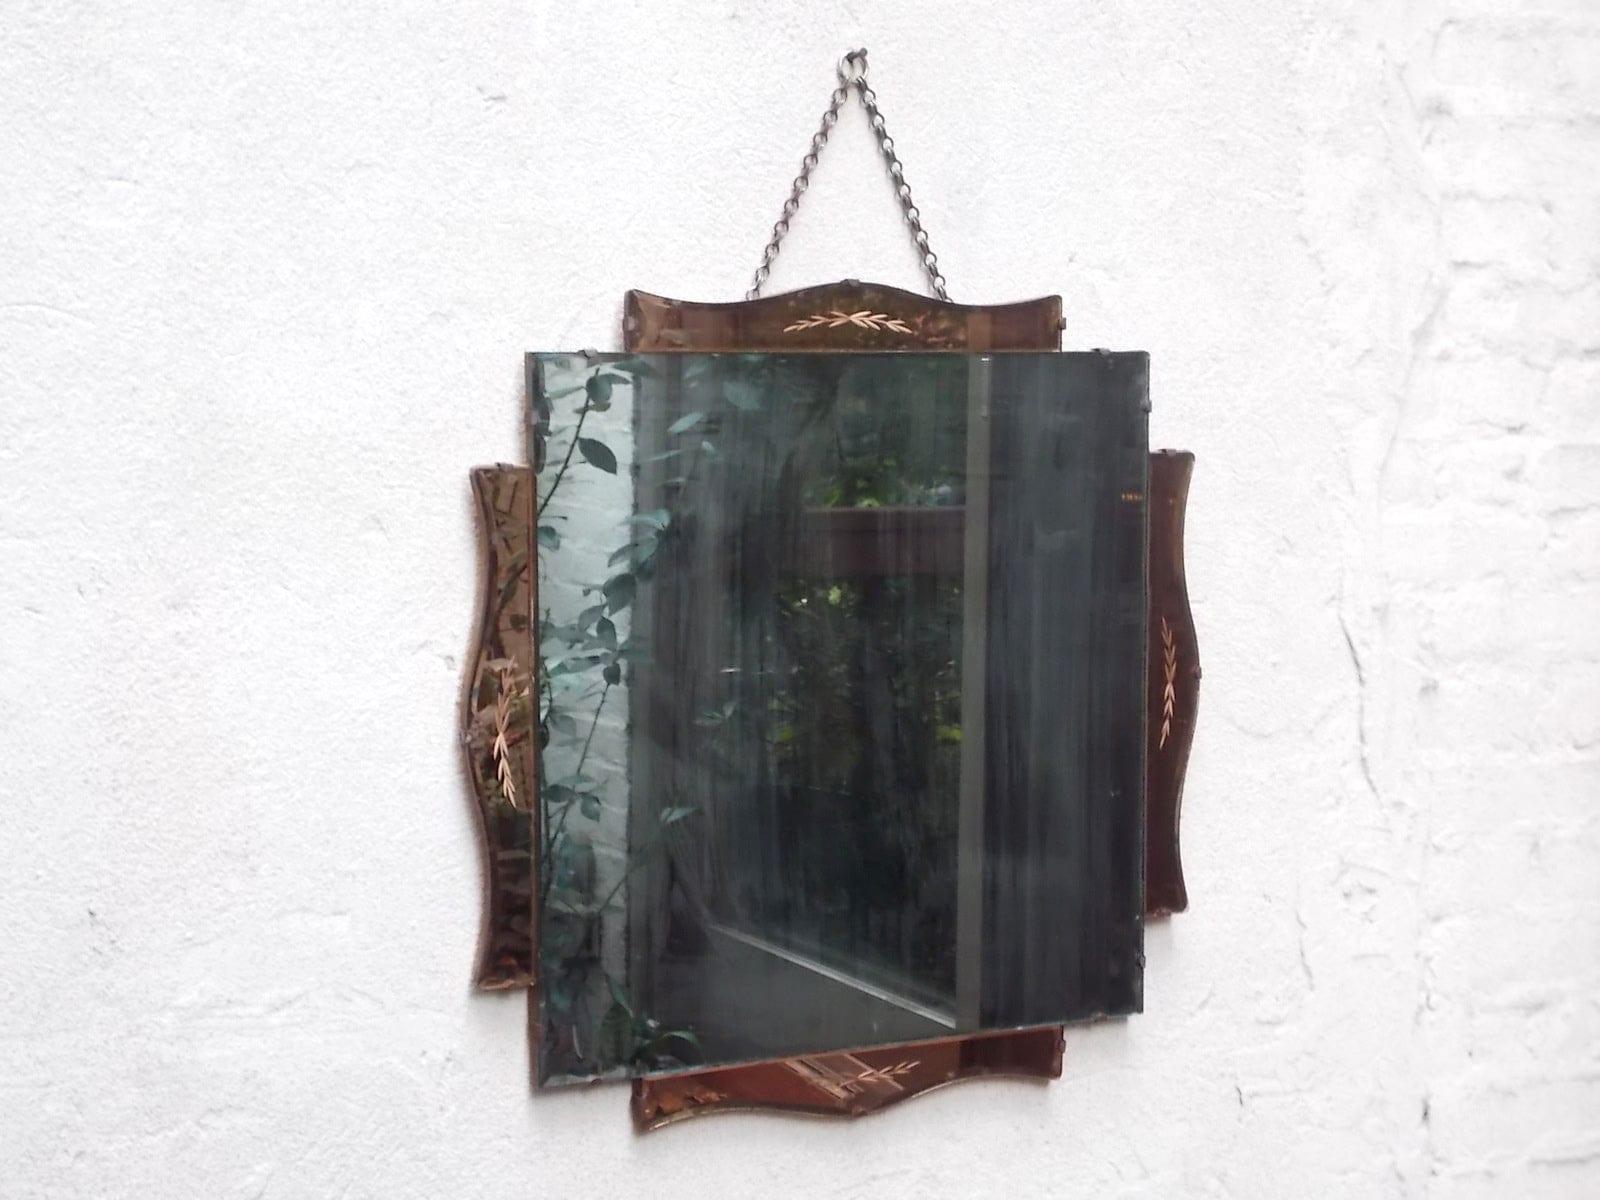 I Like Mike's Mid Century Modern Mirrors Antique Cut Glass Two-Tone Wall Mirror, Brown Glass, Decorative Etching